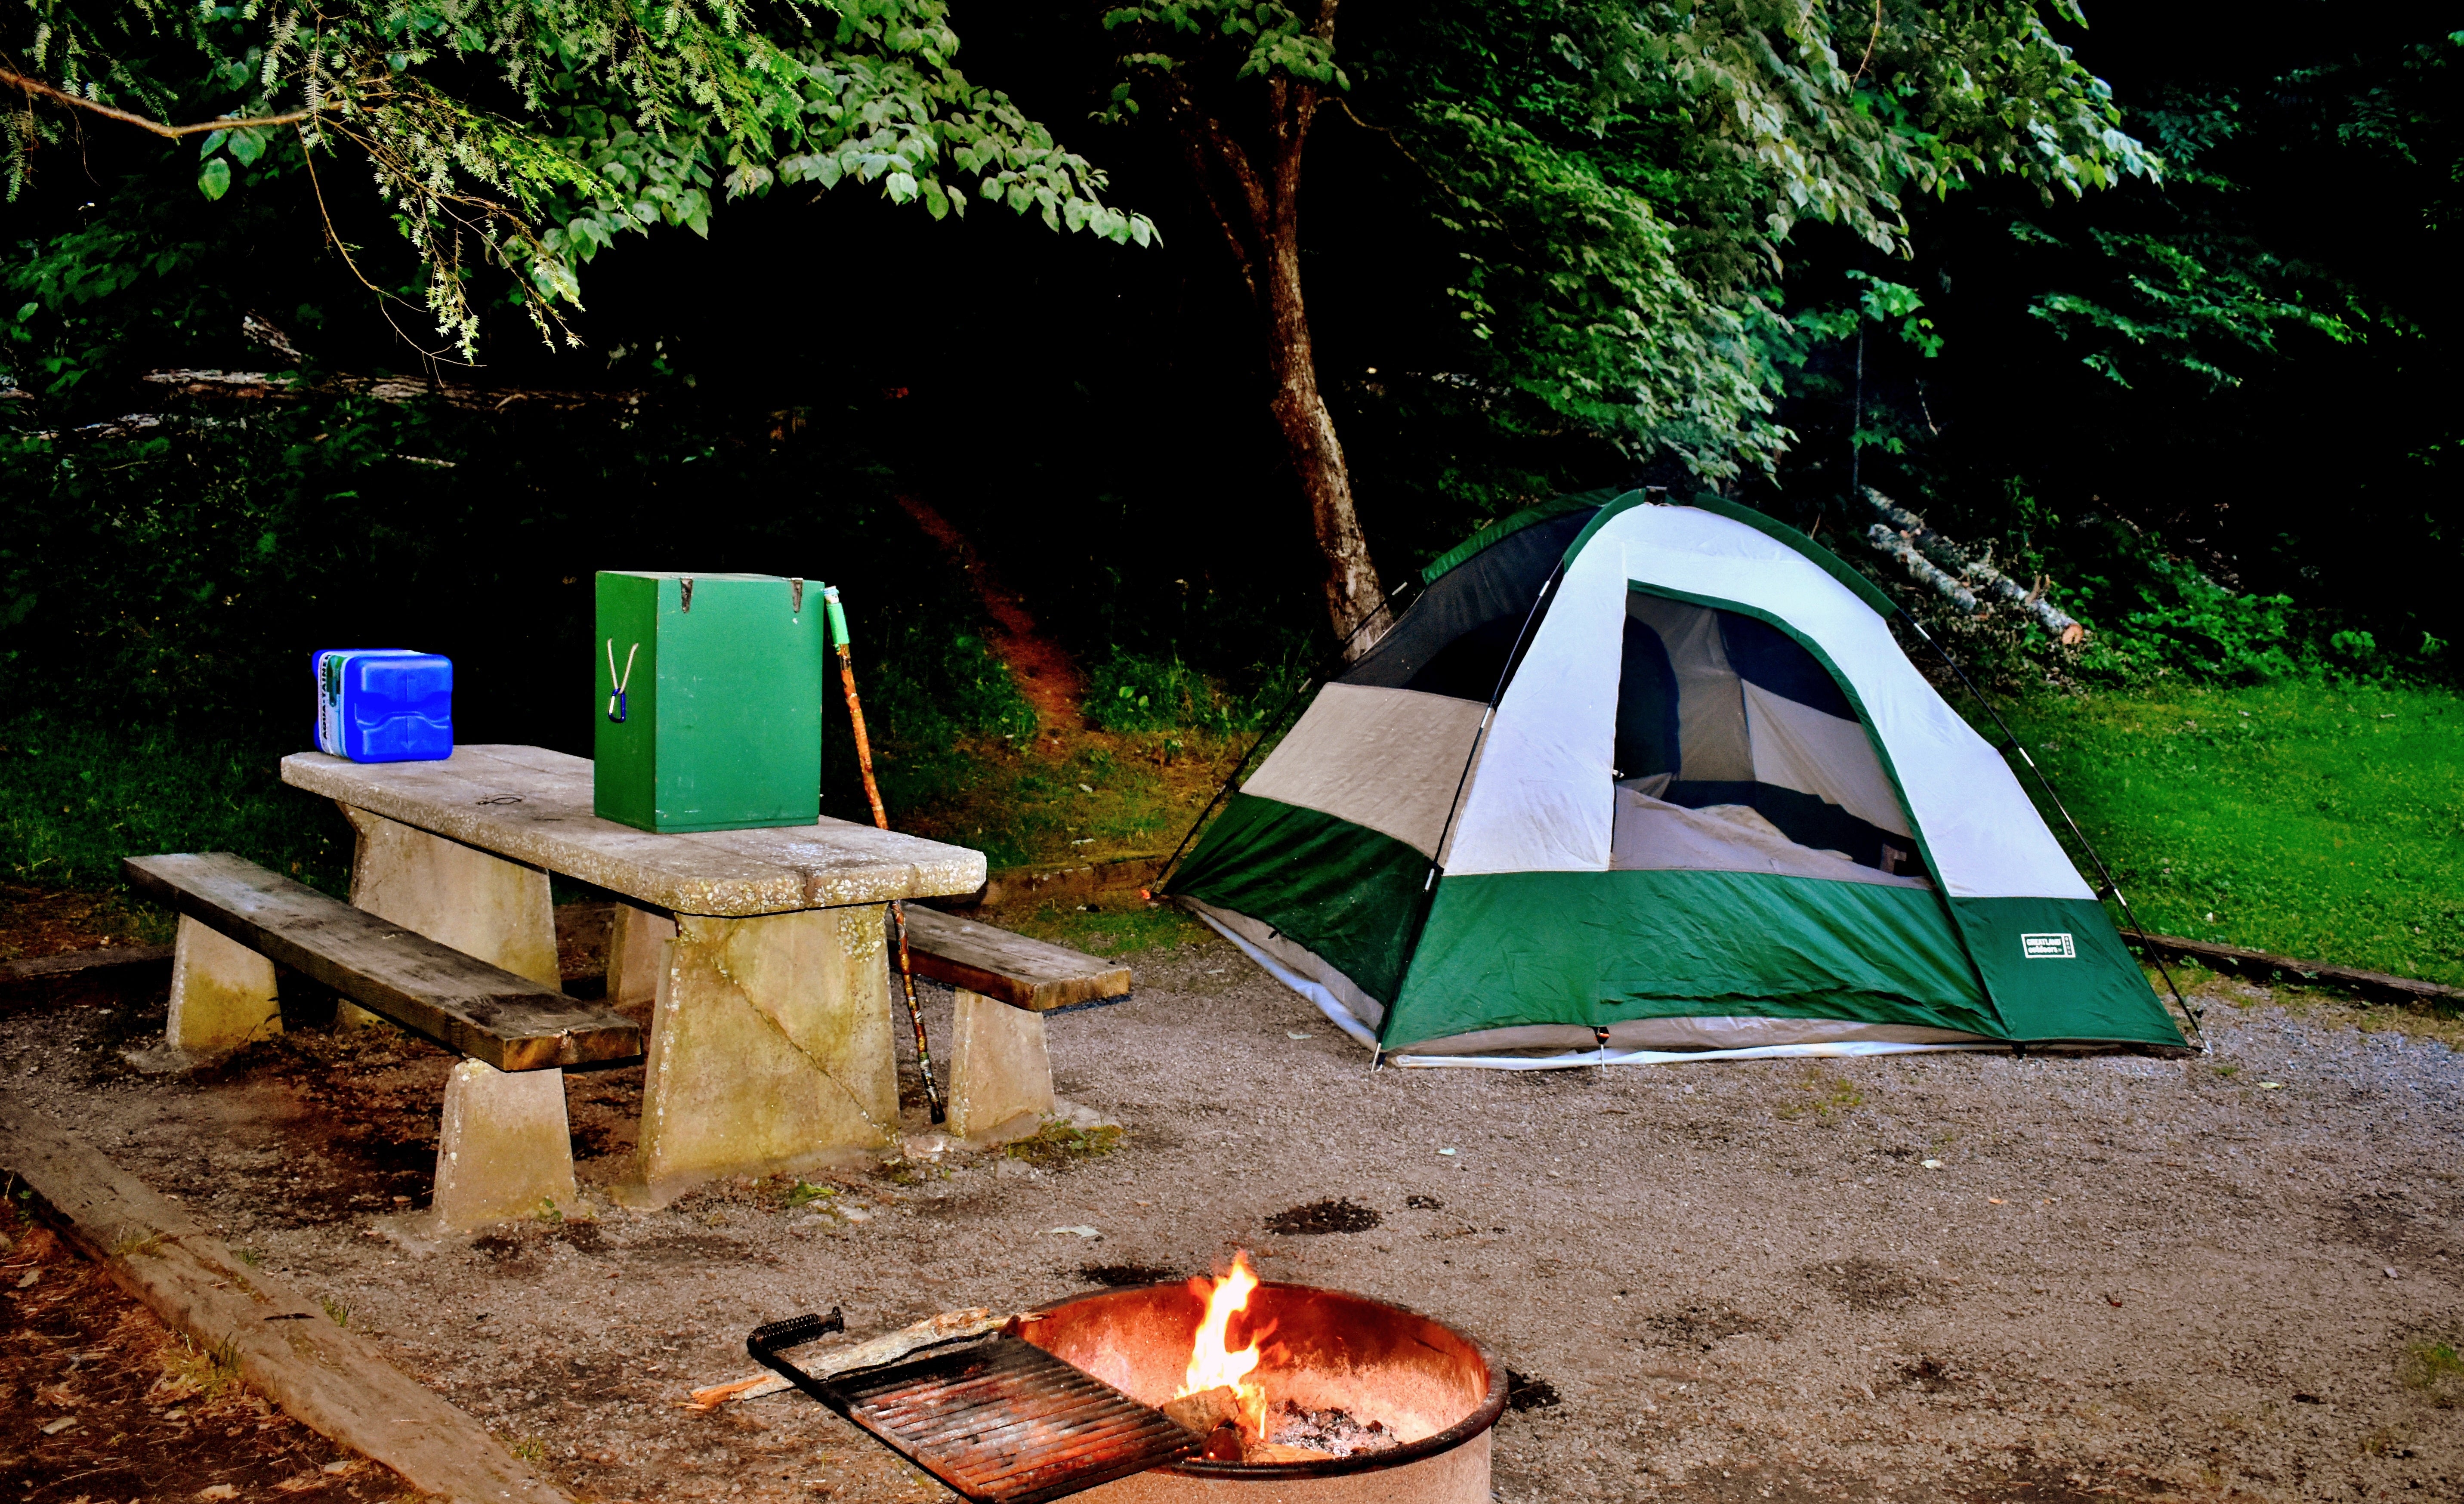 Adequate space, picnic tables, and fire pits make the campsites feel like "camping home."